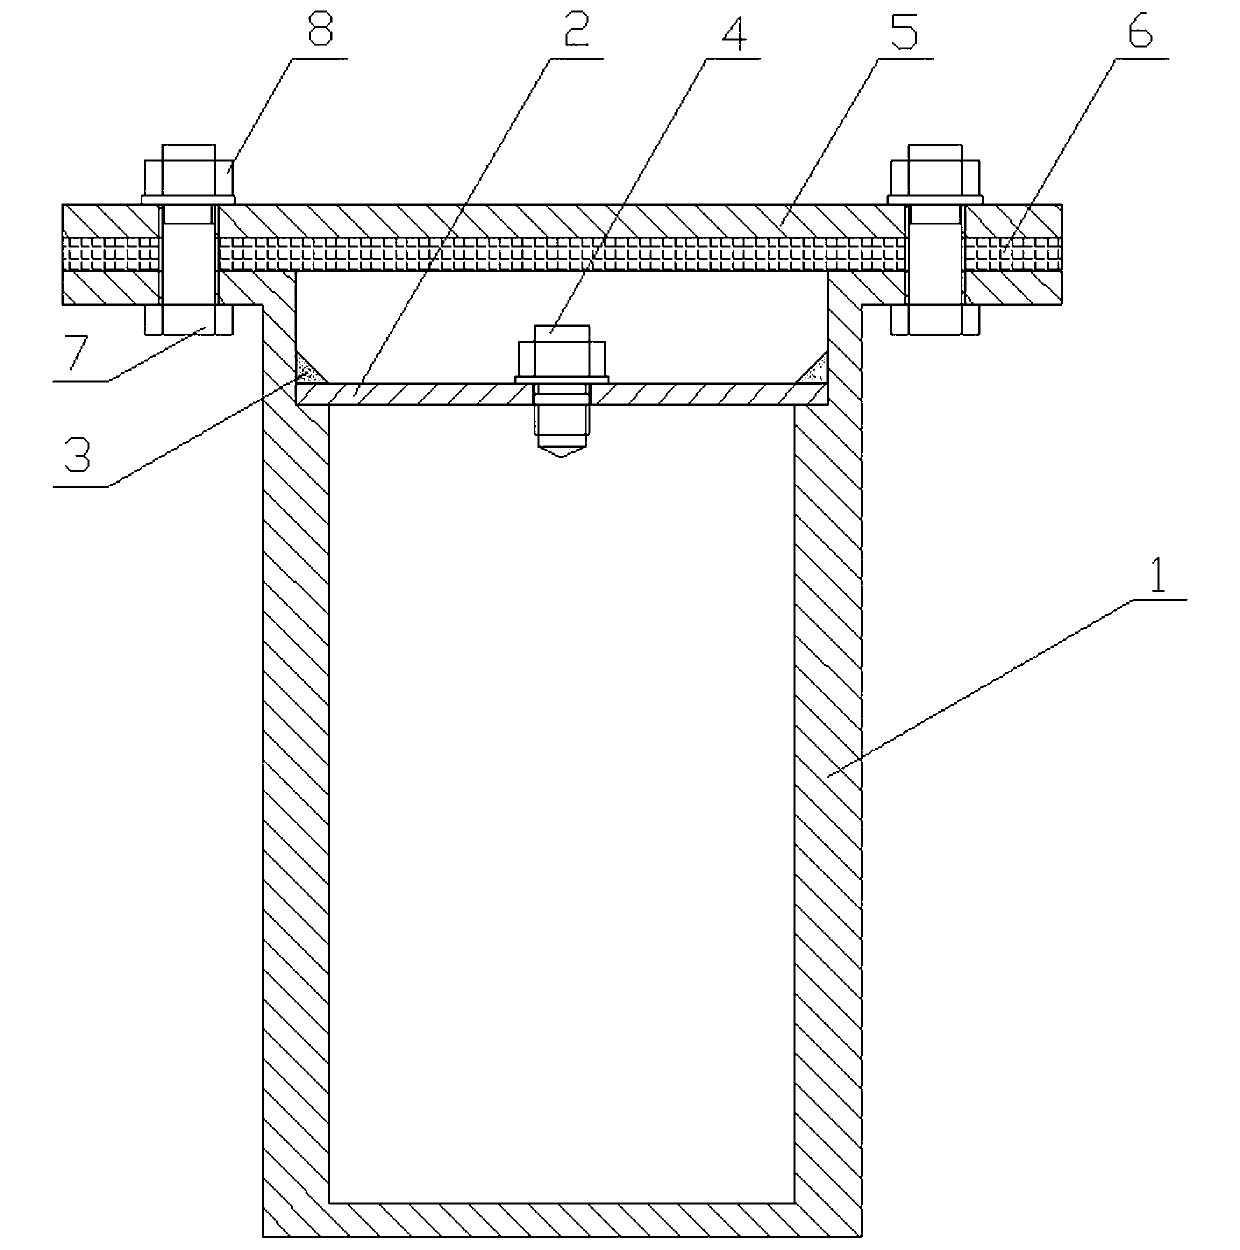 Low-temperature pack boronizing steel part surface-strengthening treatment device and method